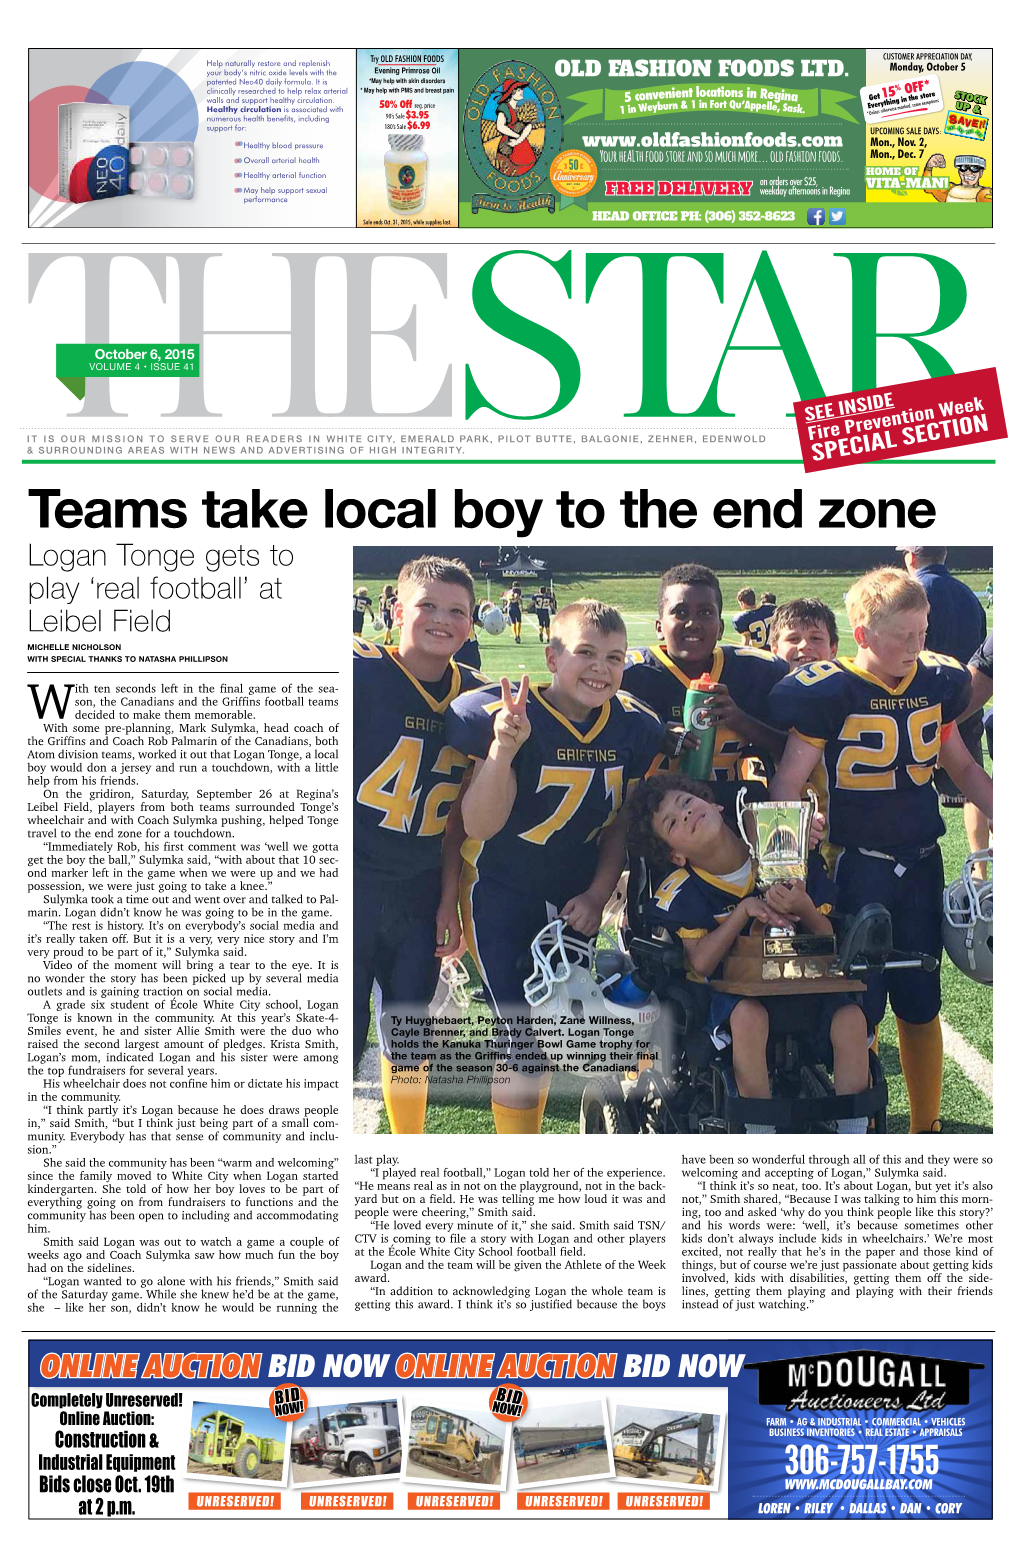 Teams Take Local Boy to the End Zone Logan Tonge Gets to Play ‘Real Football’ at Leibel Field MICHELLE NICHOLSON with SPECIAL THANKS to NATASHA PHILLIPSON